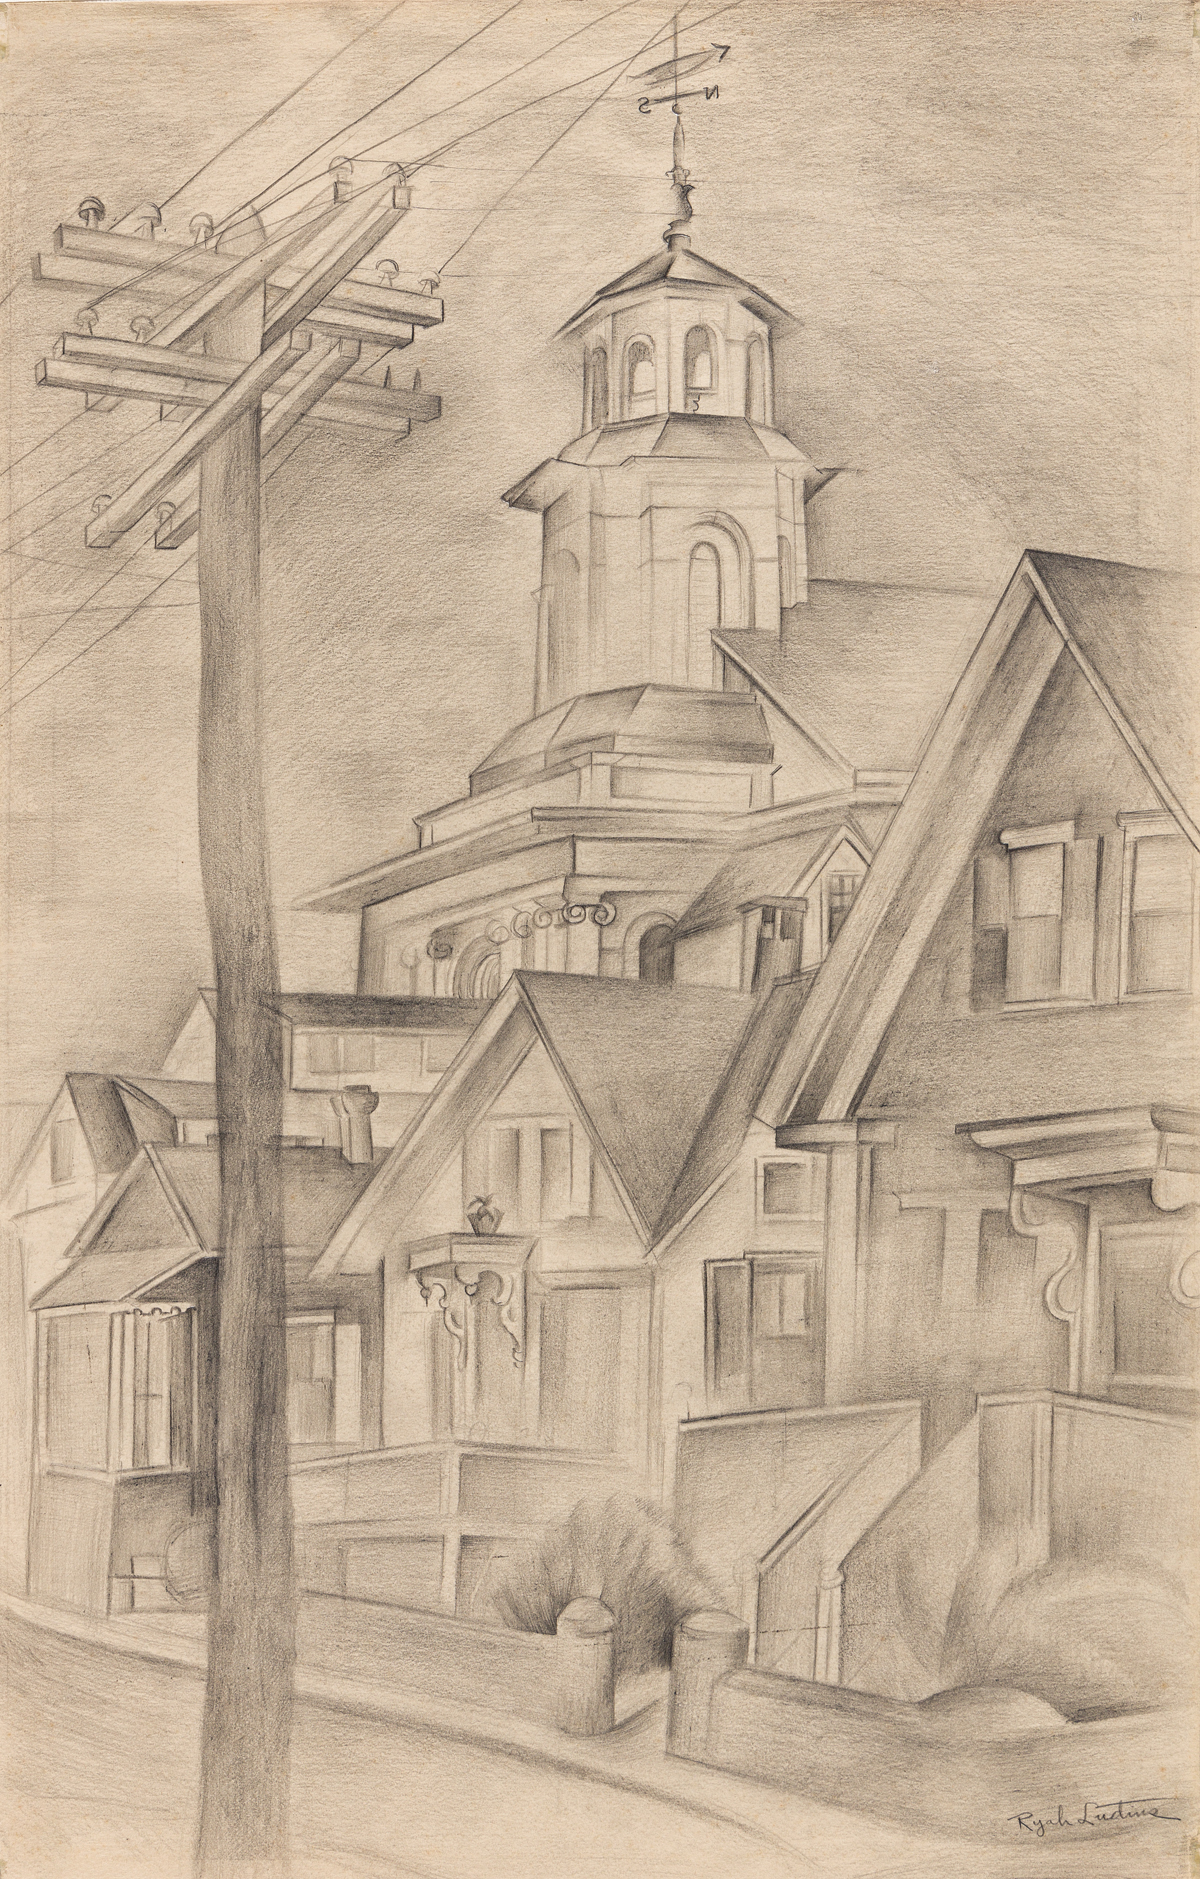 Ludins, Ryah (1896-1957) Untitled Drawing of the Center Methodist Church, Commercial Street, Provincetown, MA.